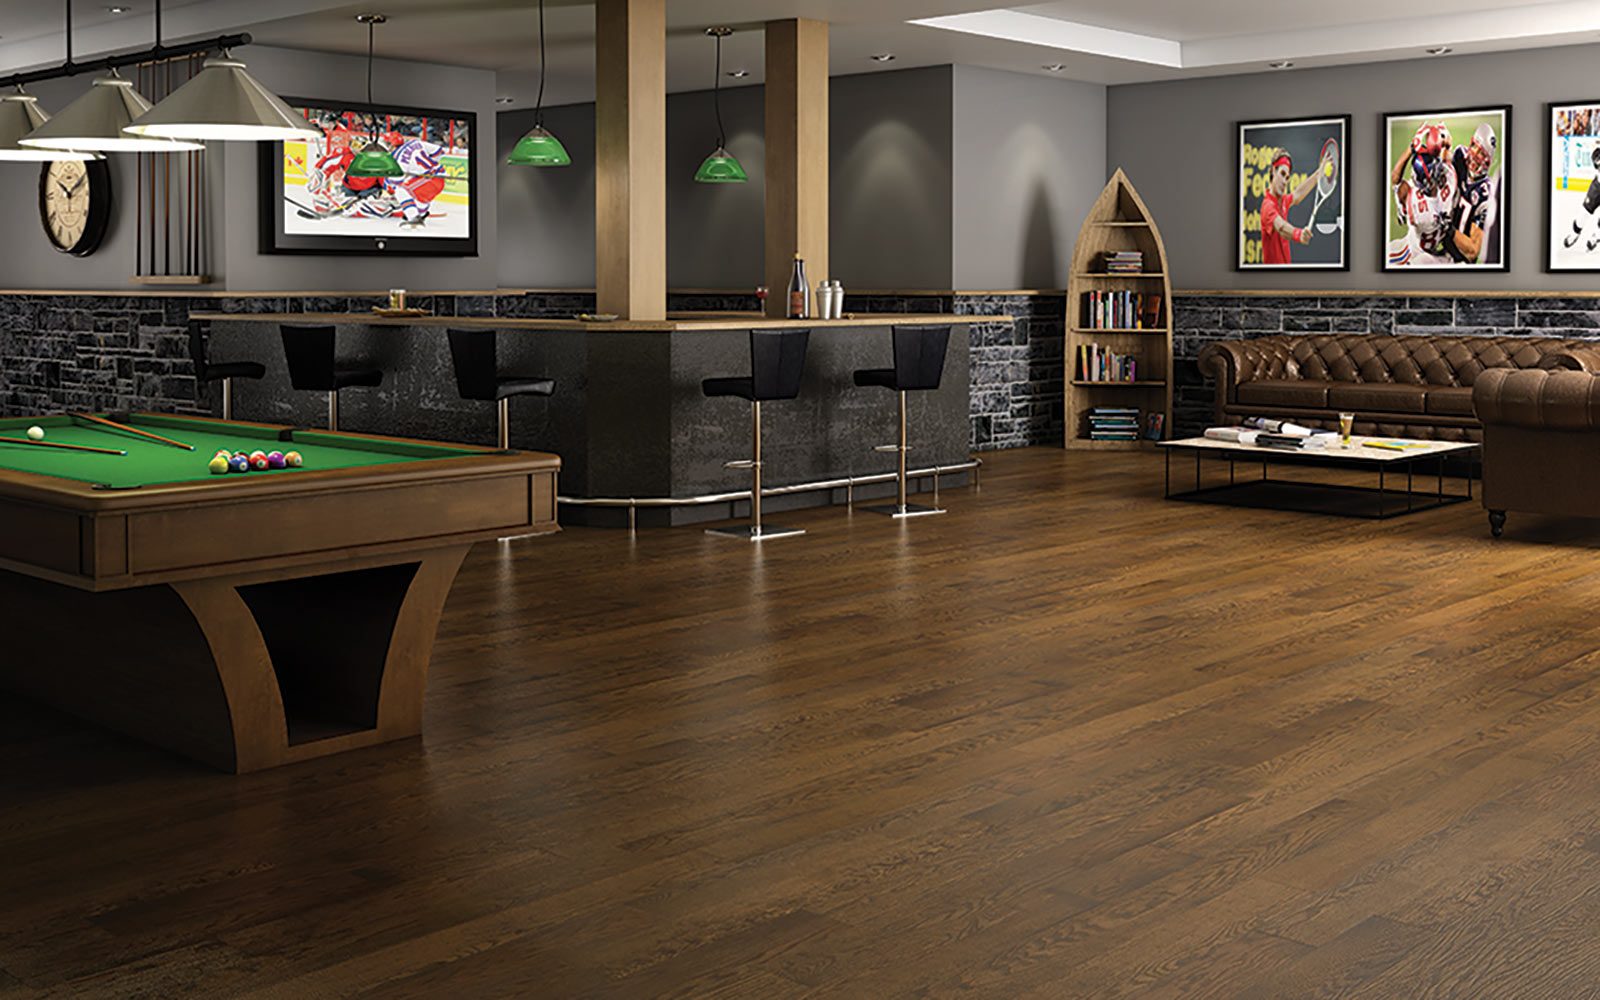 what-is-the-right-wood-flooring-for-restaurants-and-pubs|what-is-the-right-wood-flooring-for-restaurants-and-pubs|what-is-the-right-wood-flooring-for-restaurants-and-pubs|what-is-the-right-wood-flooring-for-restaurants-and-pubs